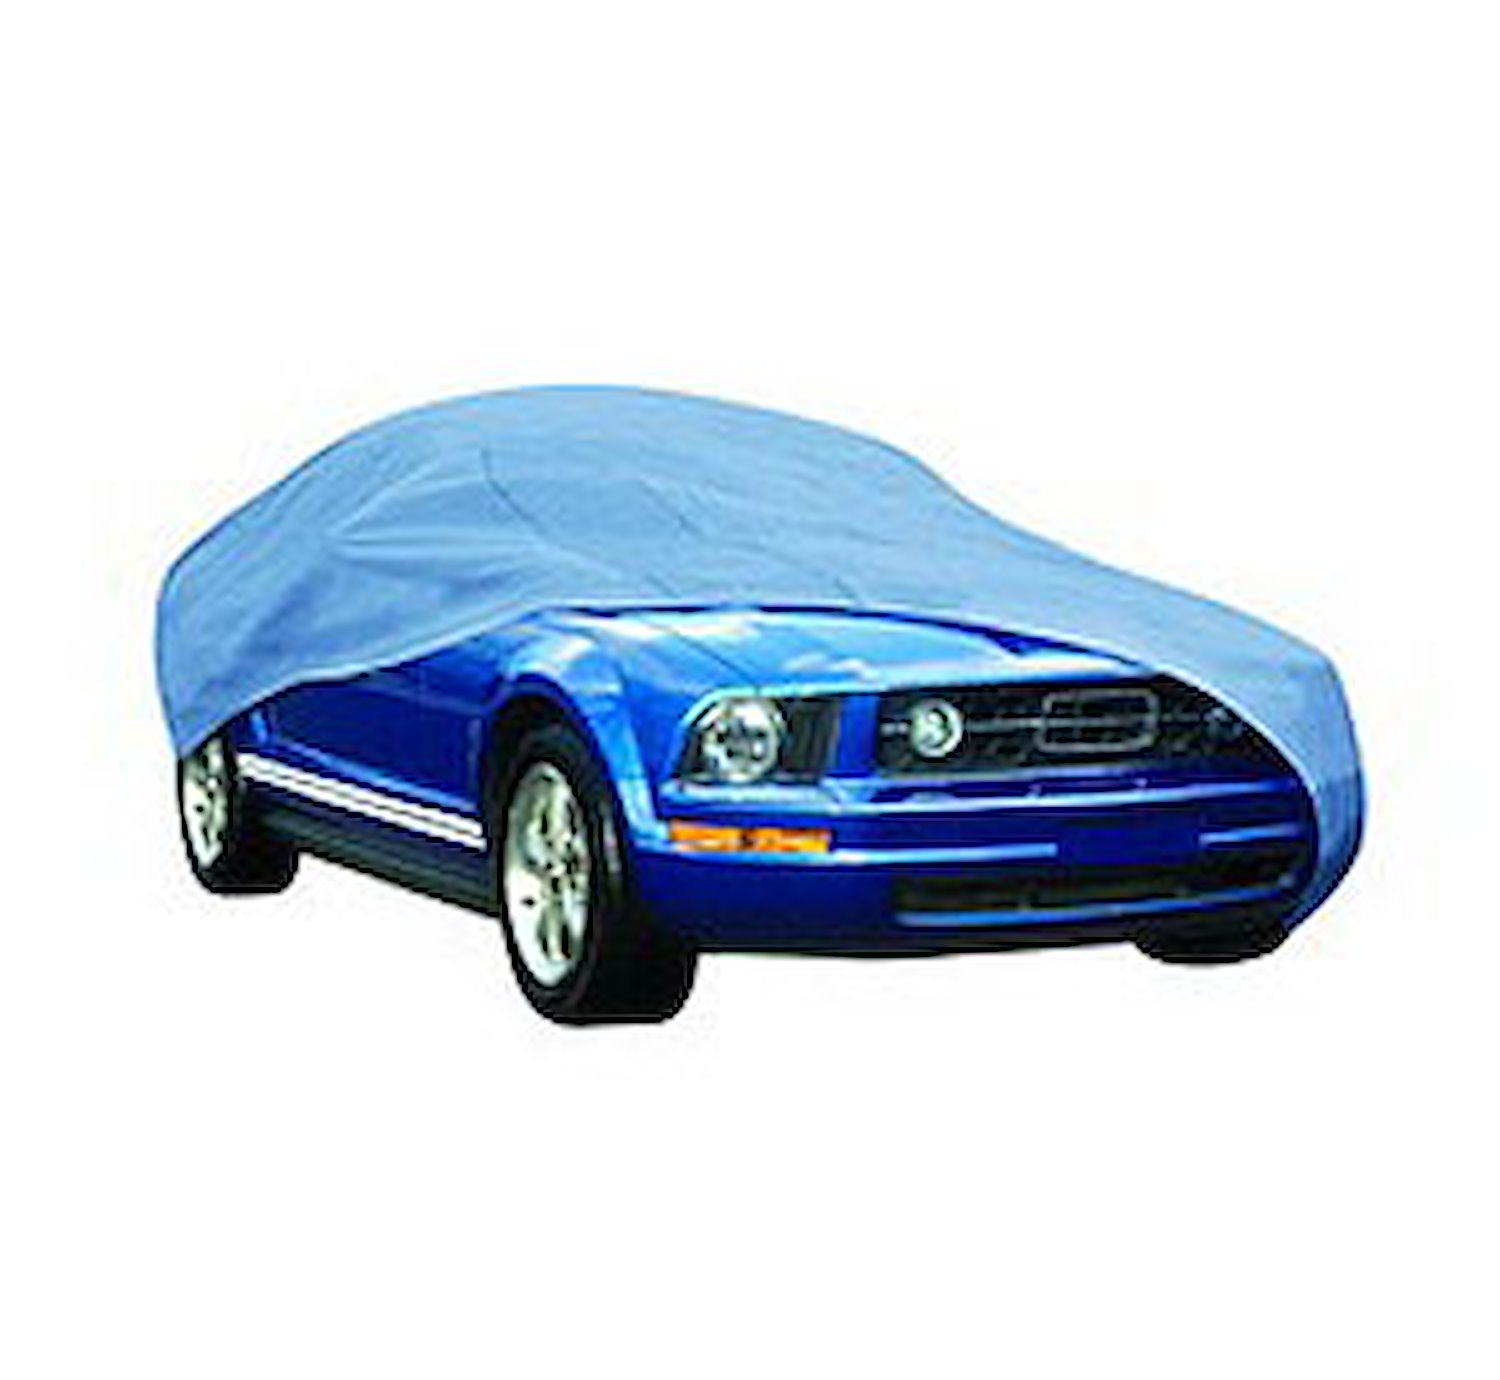 Duro Car Cover Fits Cars Up To 14" 2" in Length